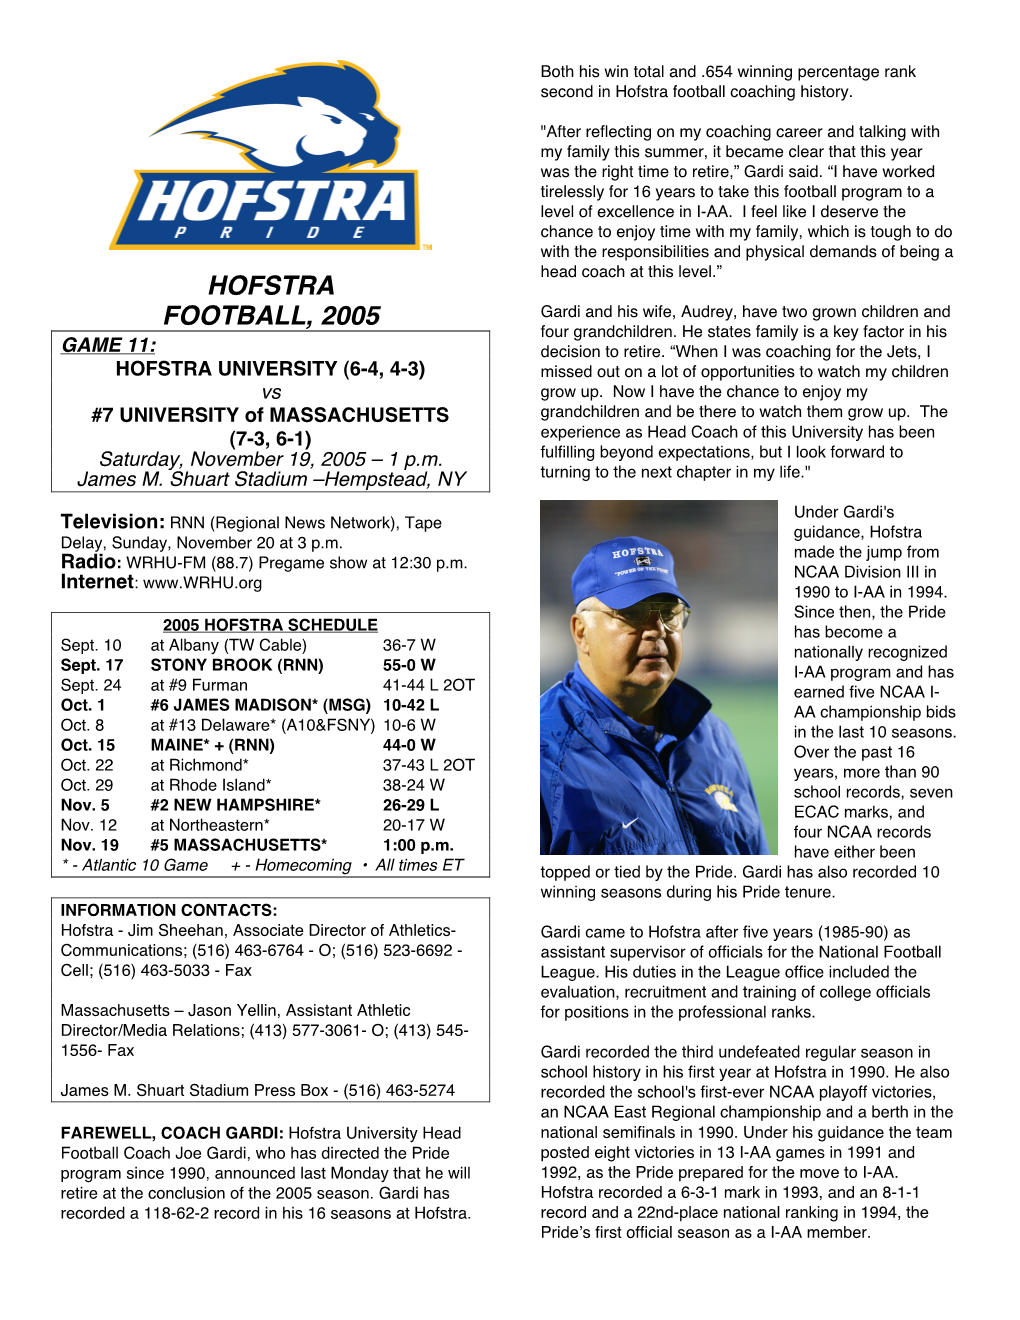 HOFSTRA FOOTBALL, 2005 Gardi and His Wife, Audrey, Have Two Grown Children and Four Grandchildren